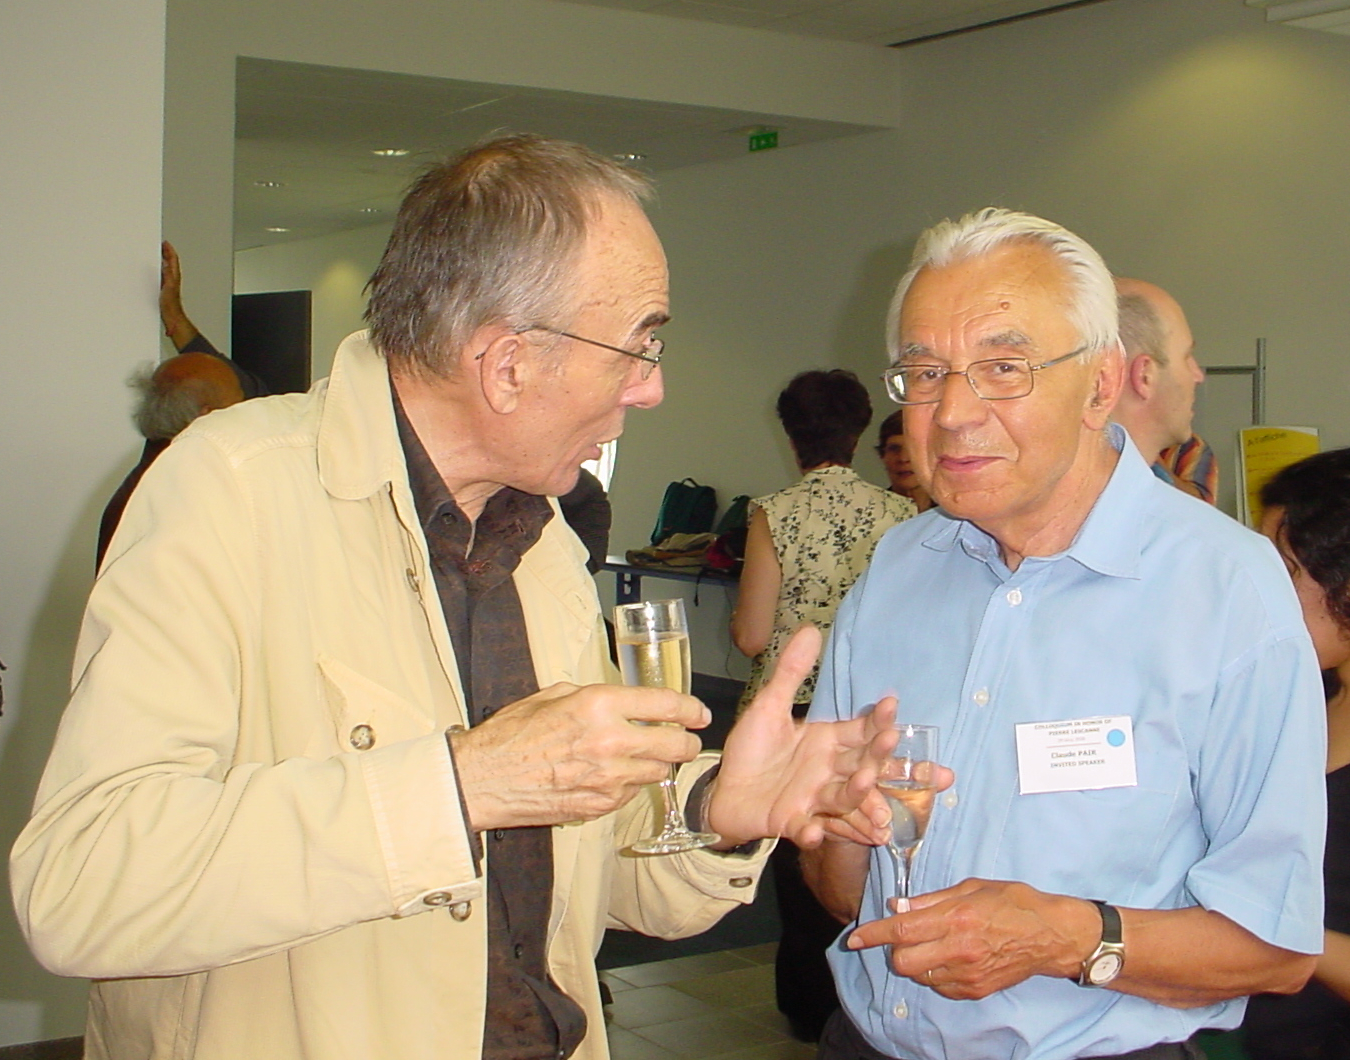 Jouannaud and Pair at colloque in the honor of Pierre lescanne